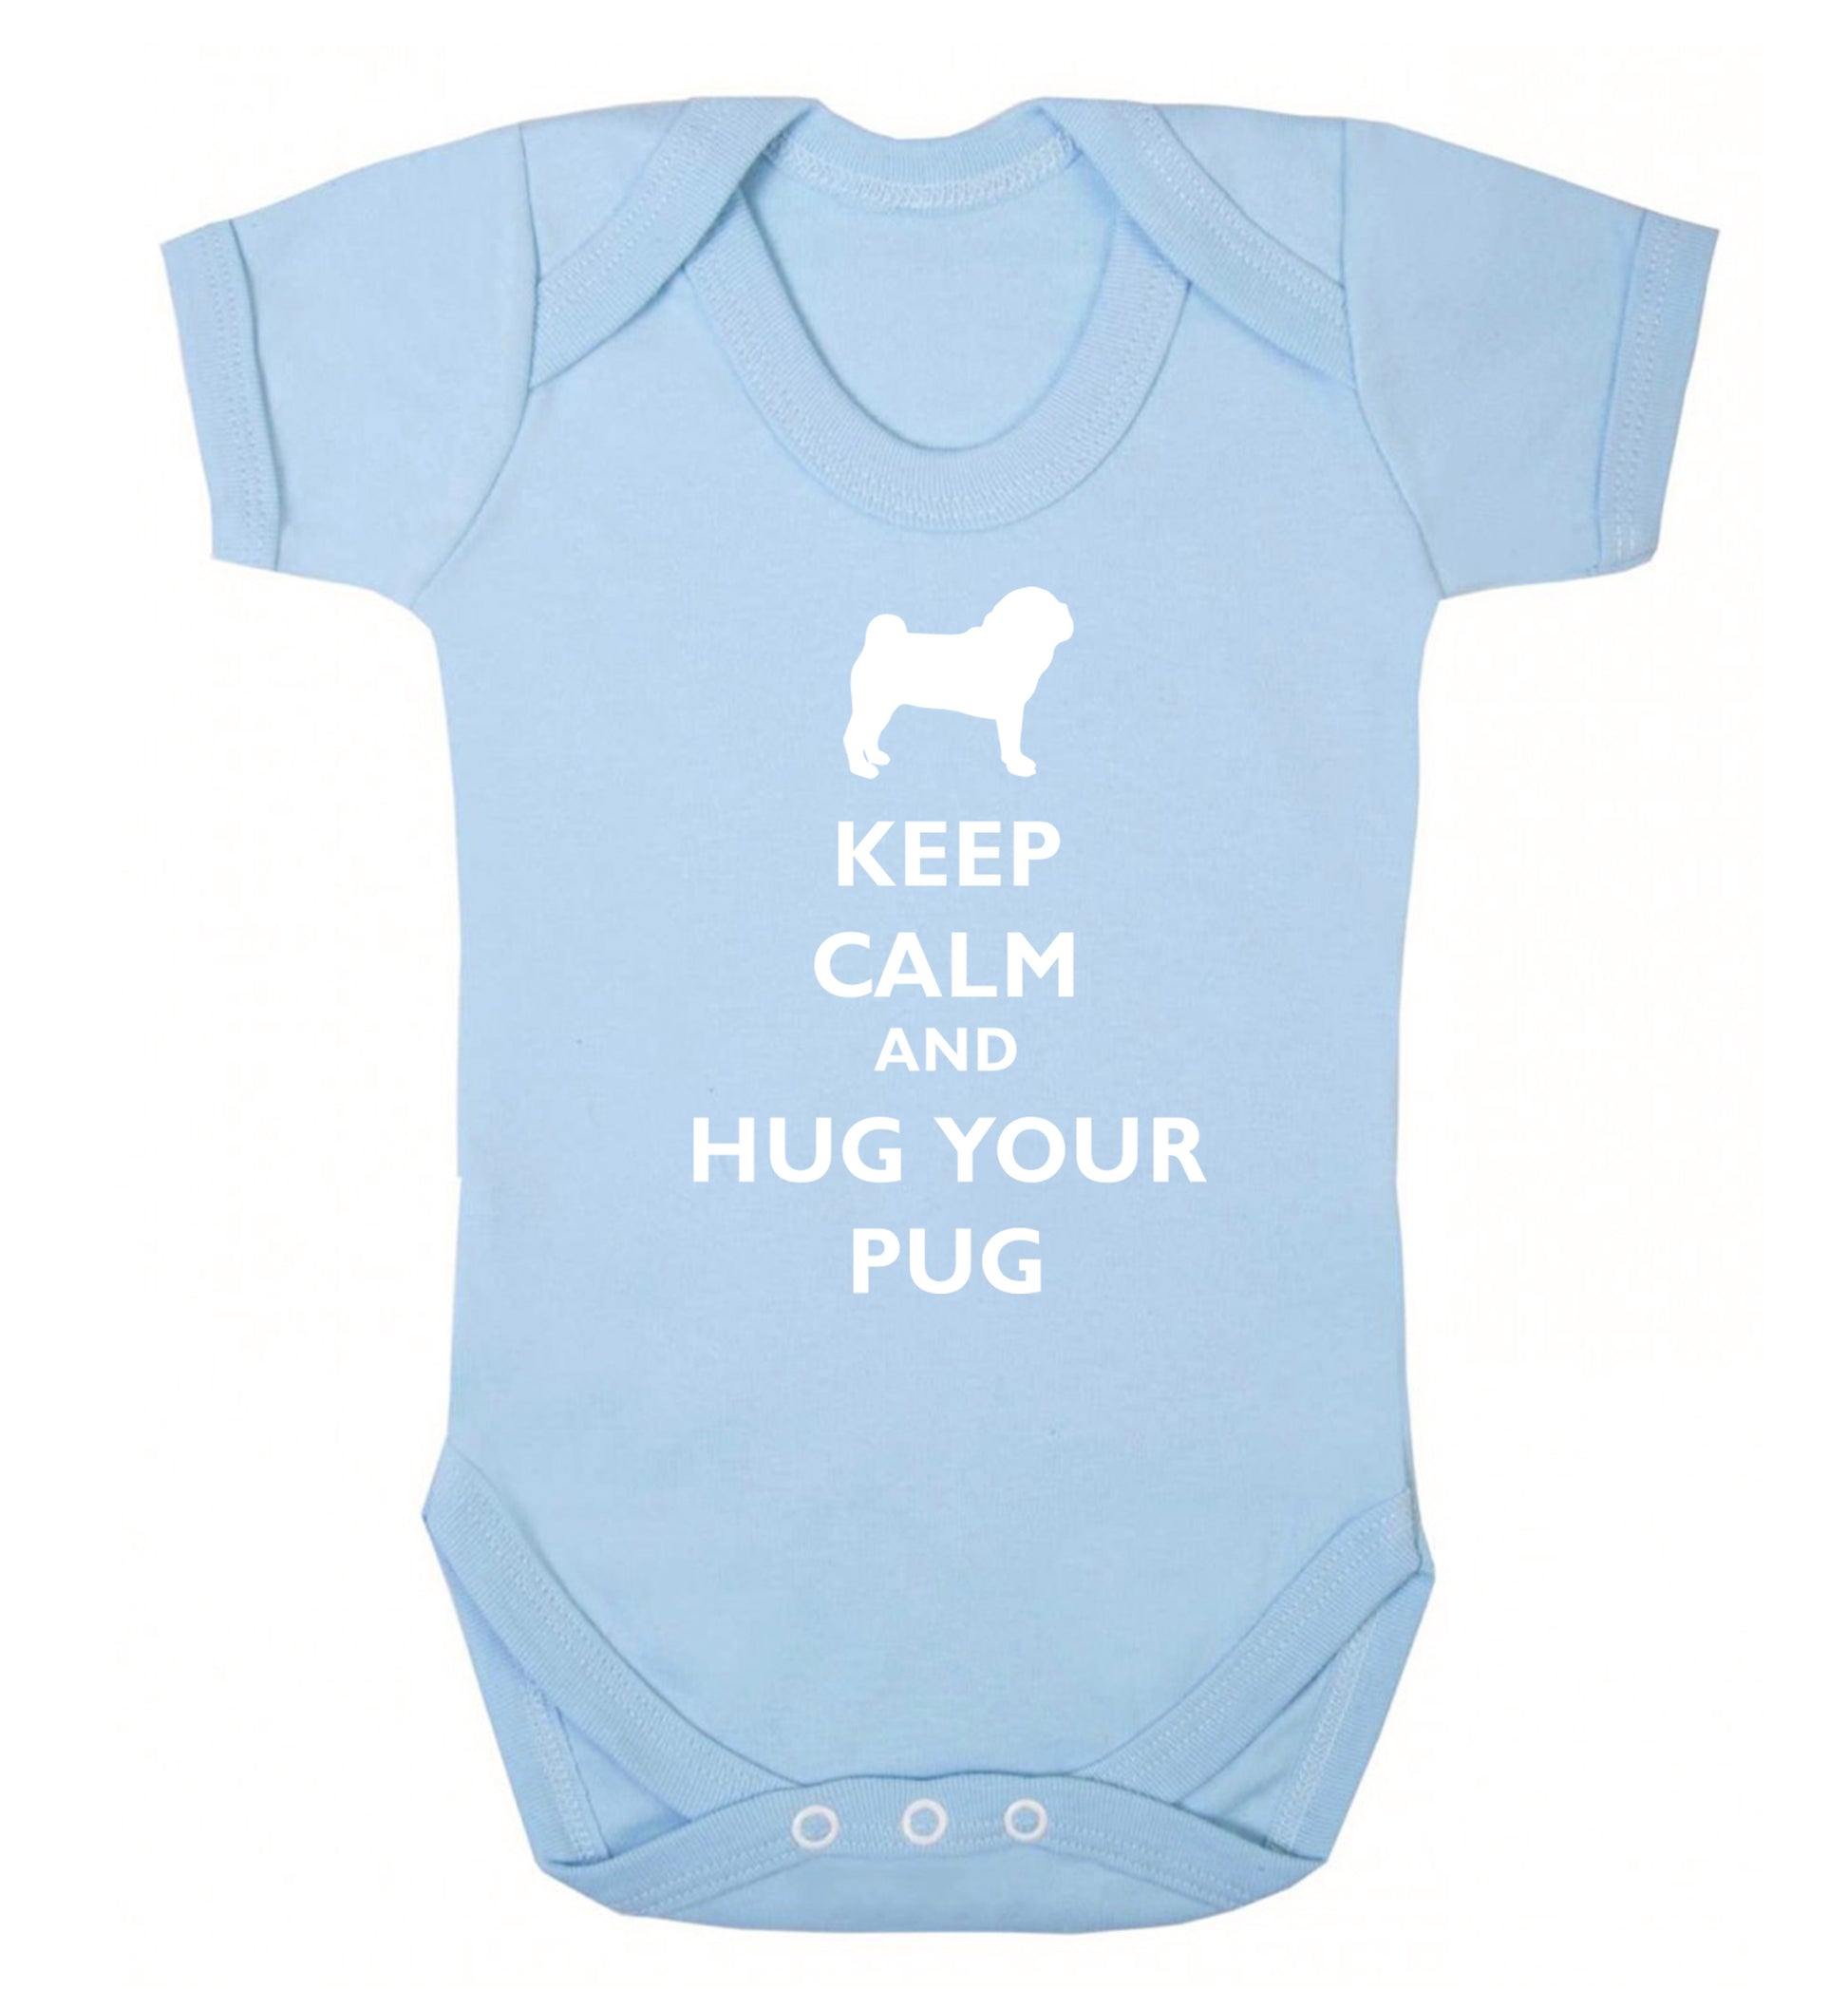 Keep calm and hug your pug Baby Vest pale blue 18-24 months